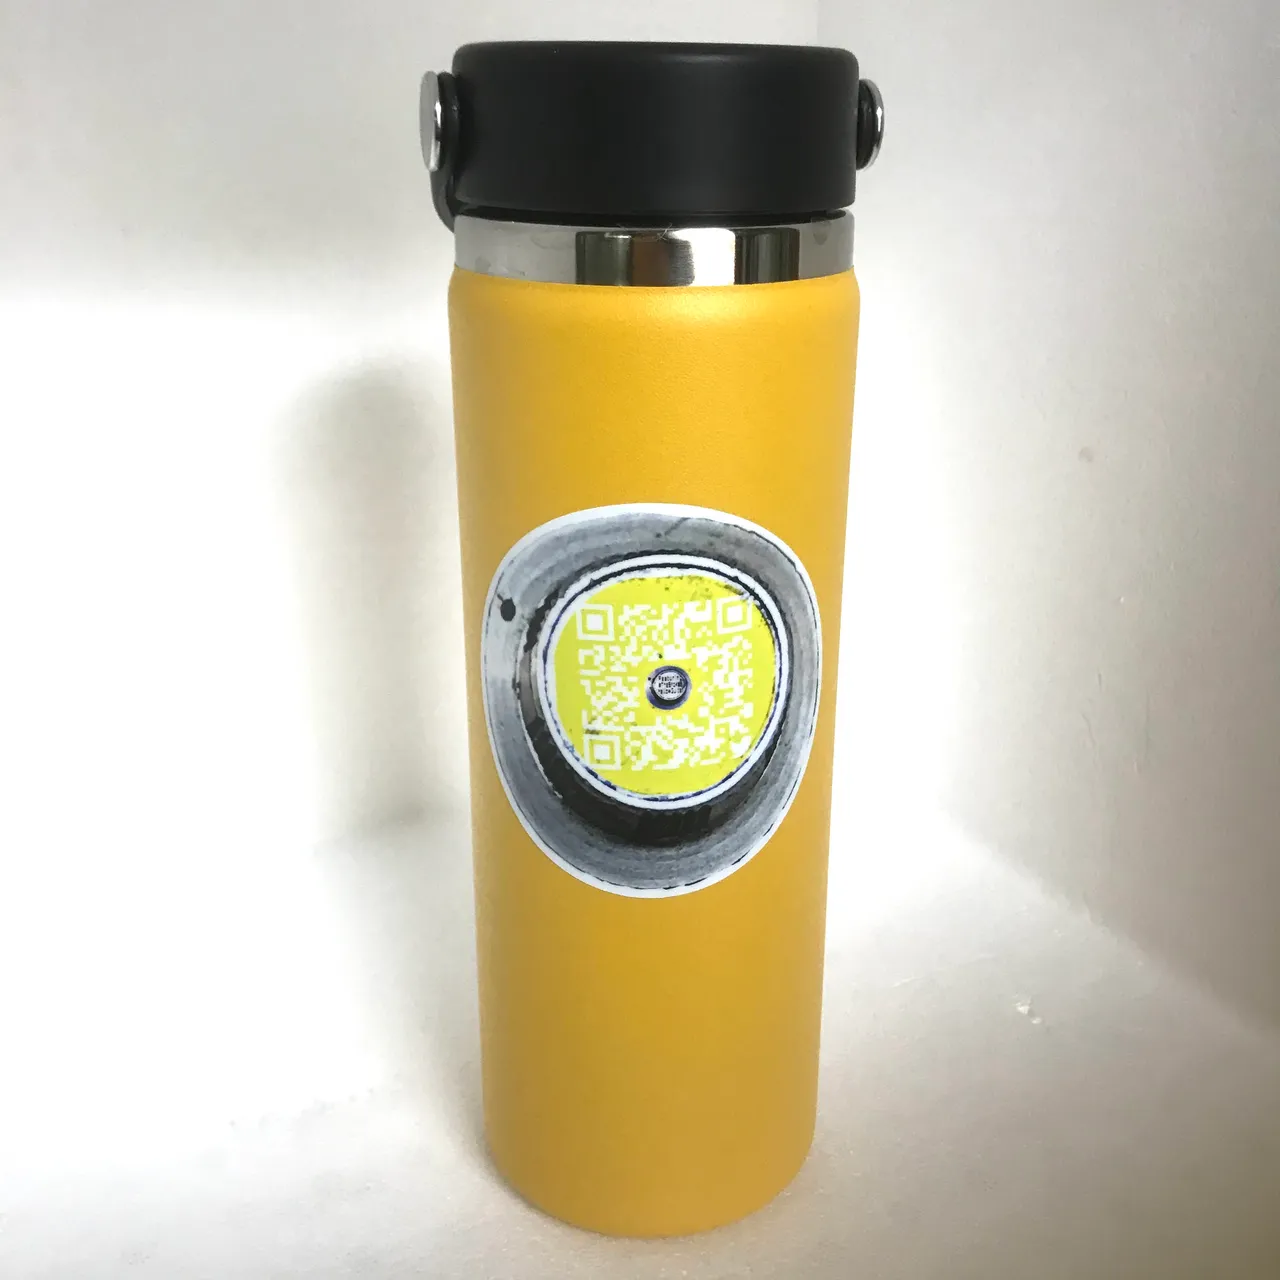 tbyg_qrcode_knob_on_yellow_hydoflask.png